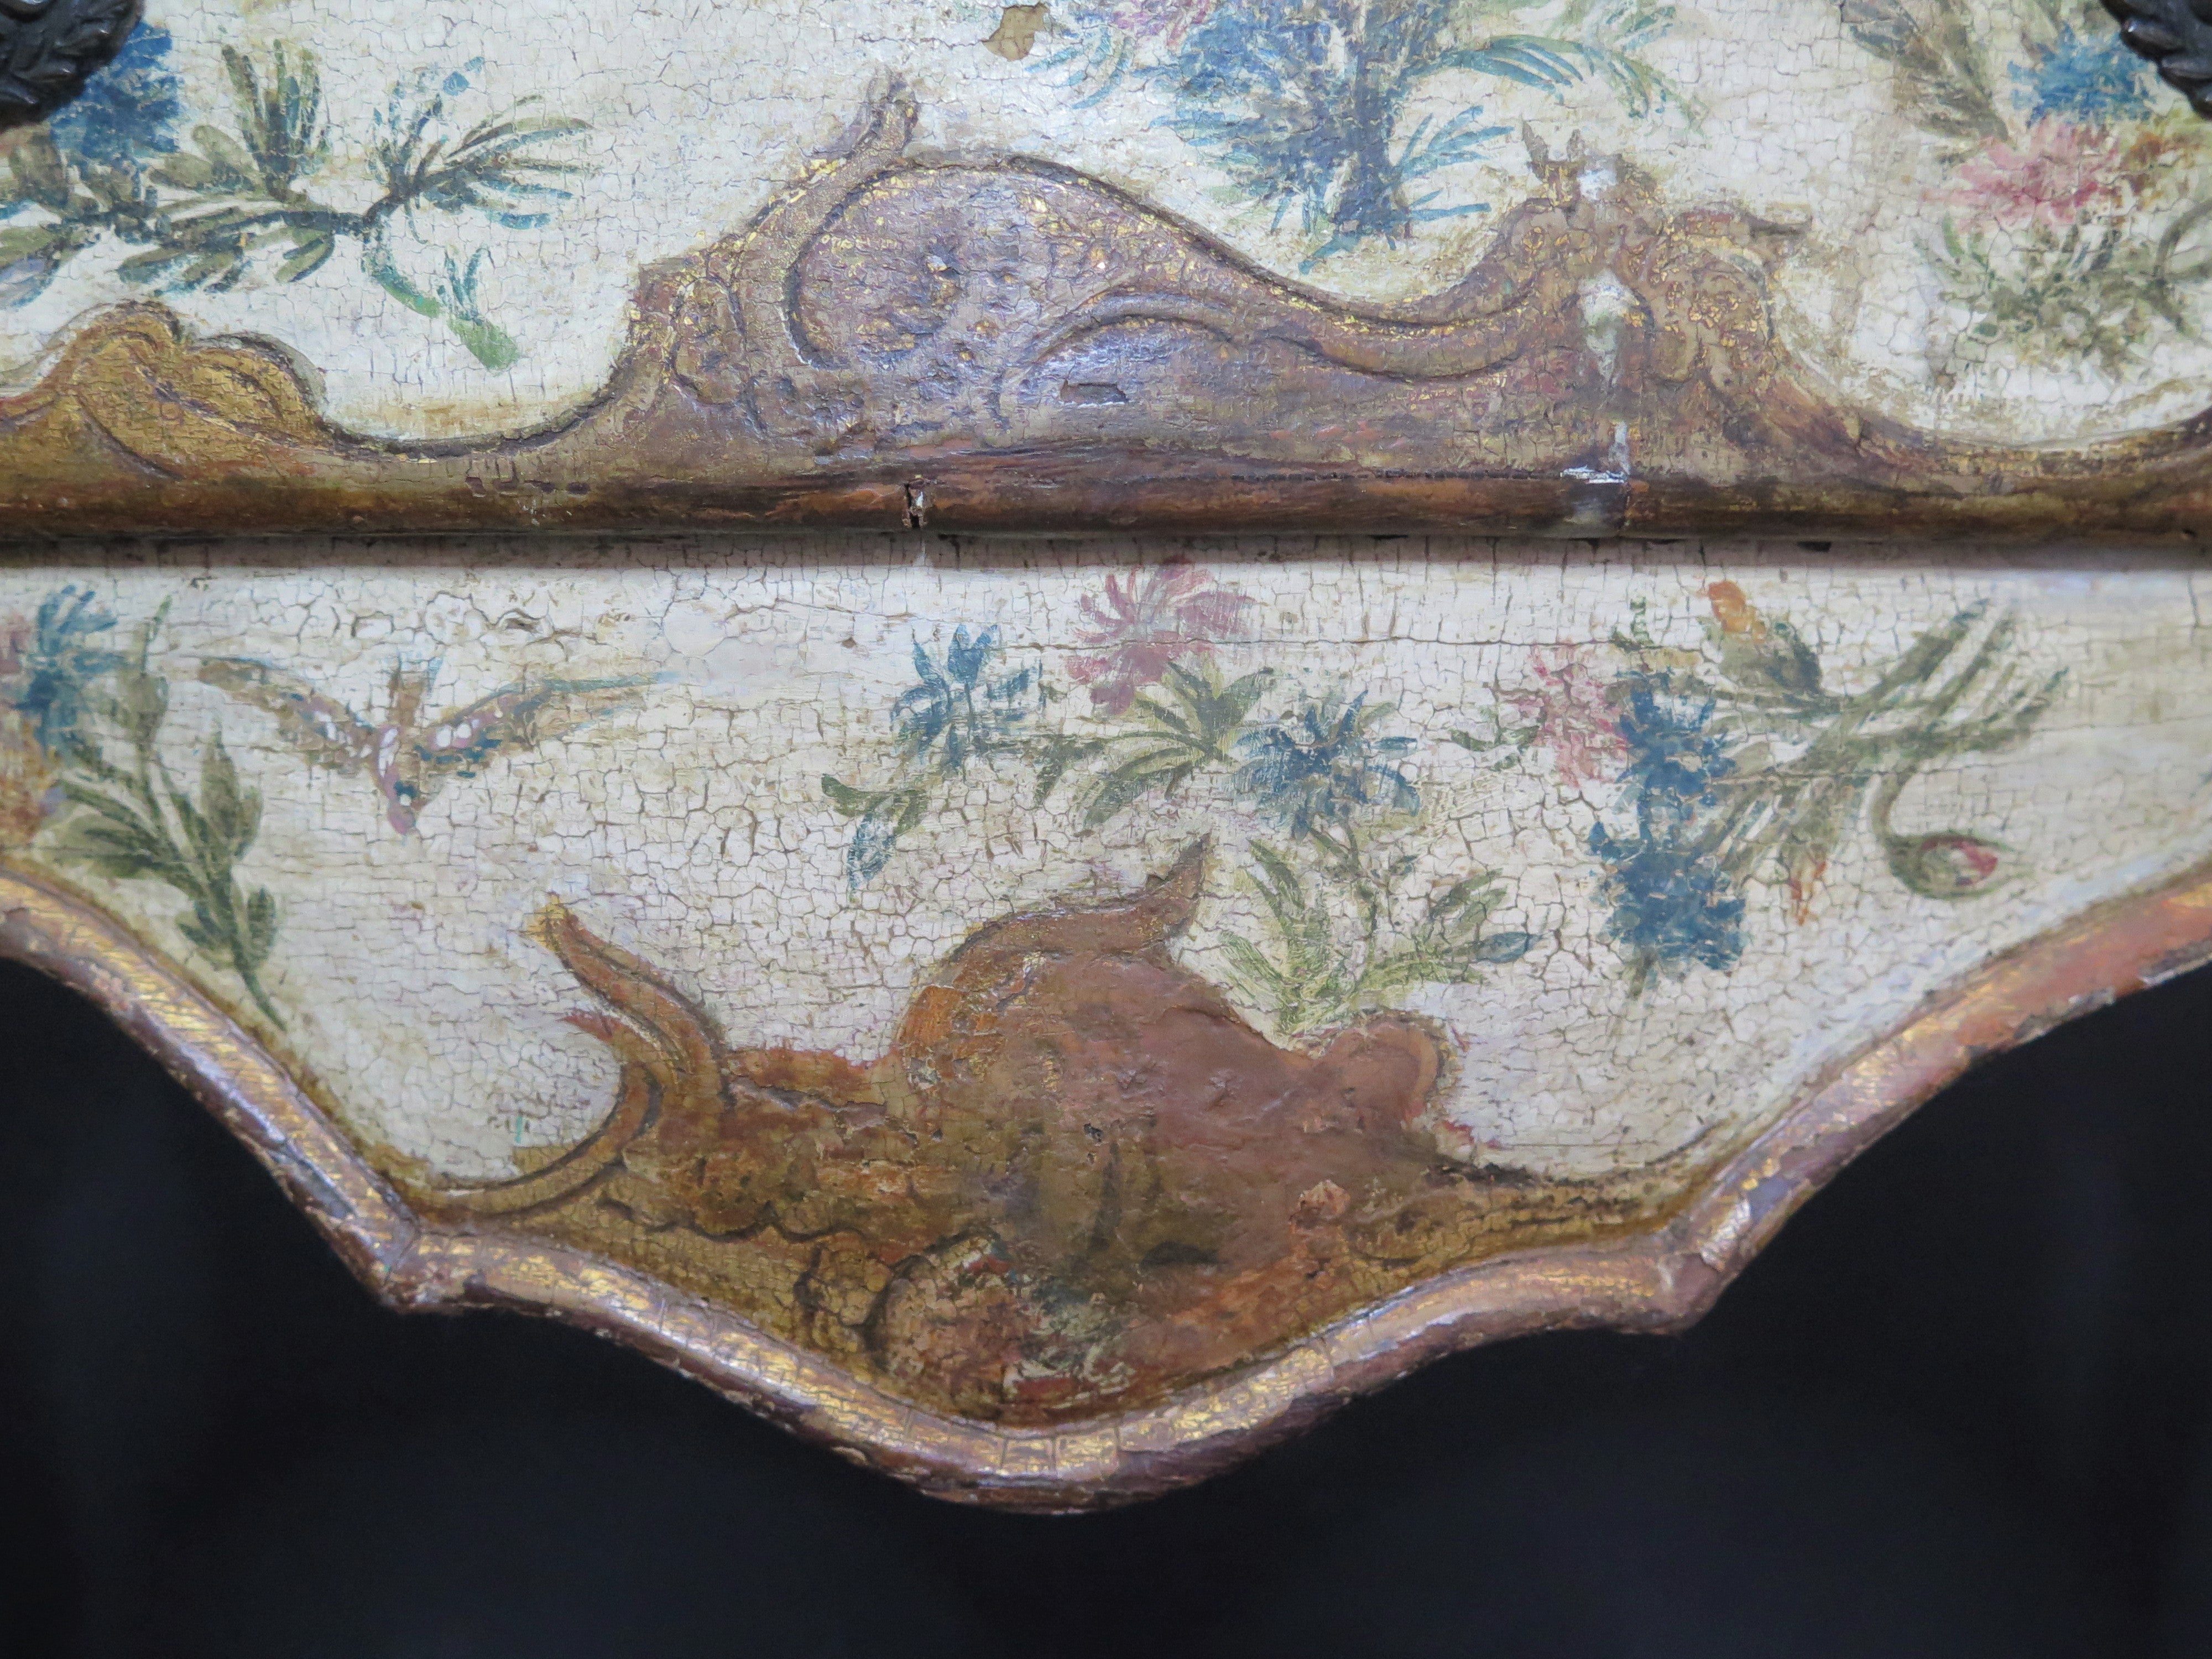 An Early 18th Century Italian Painted Side Table, Circa 1720